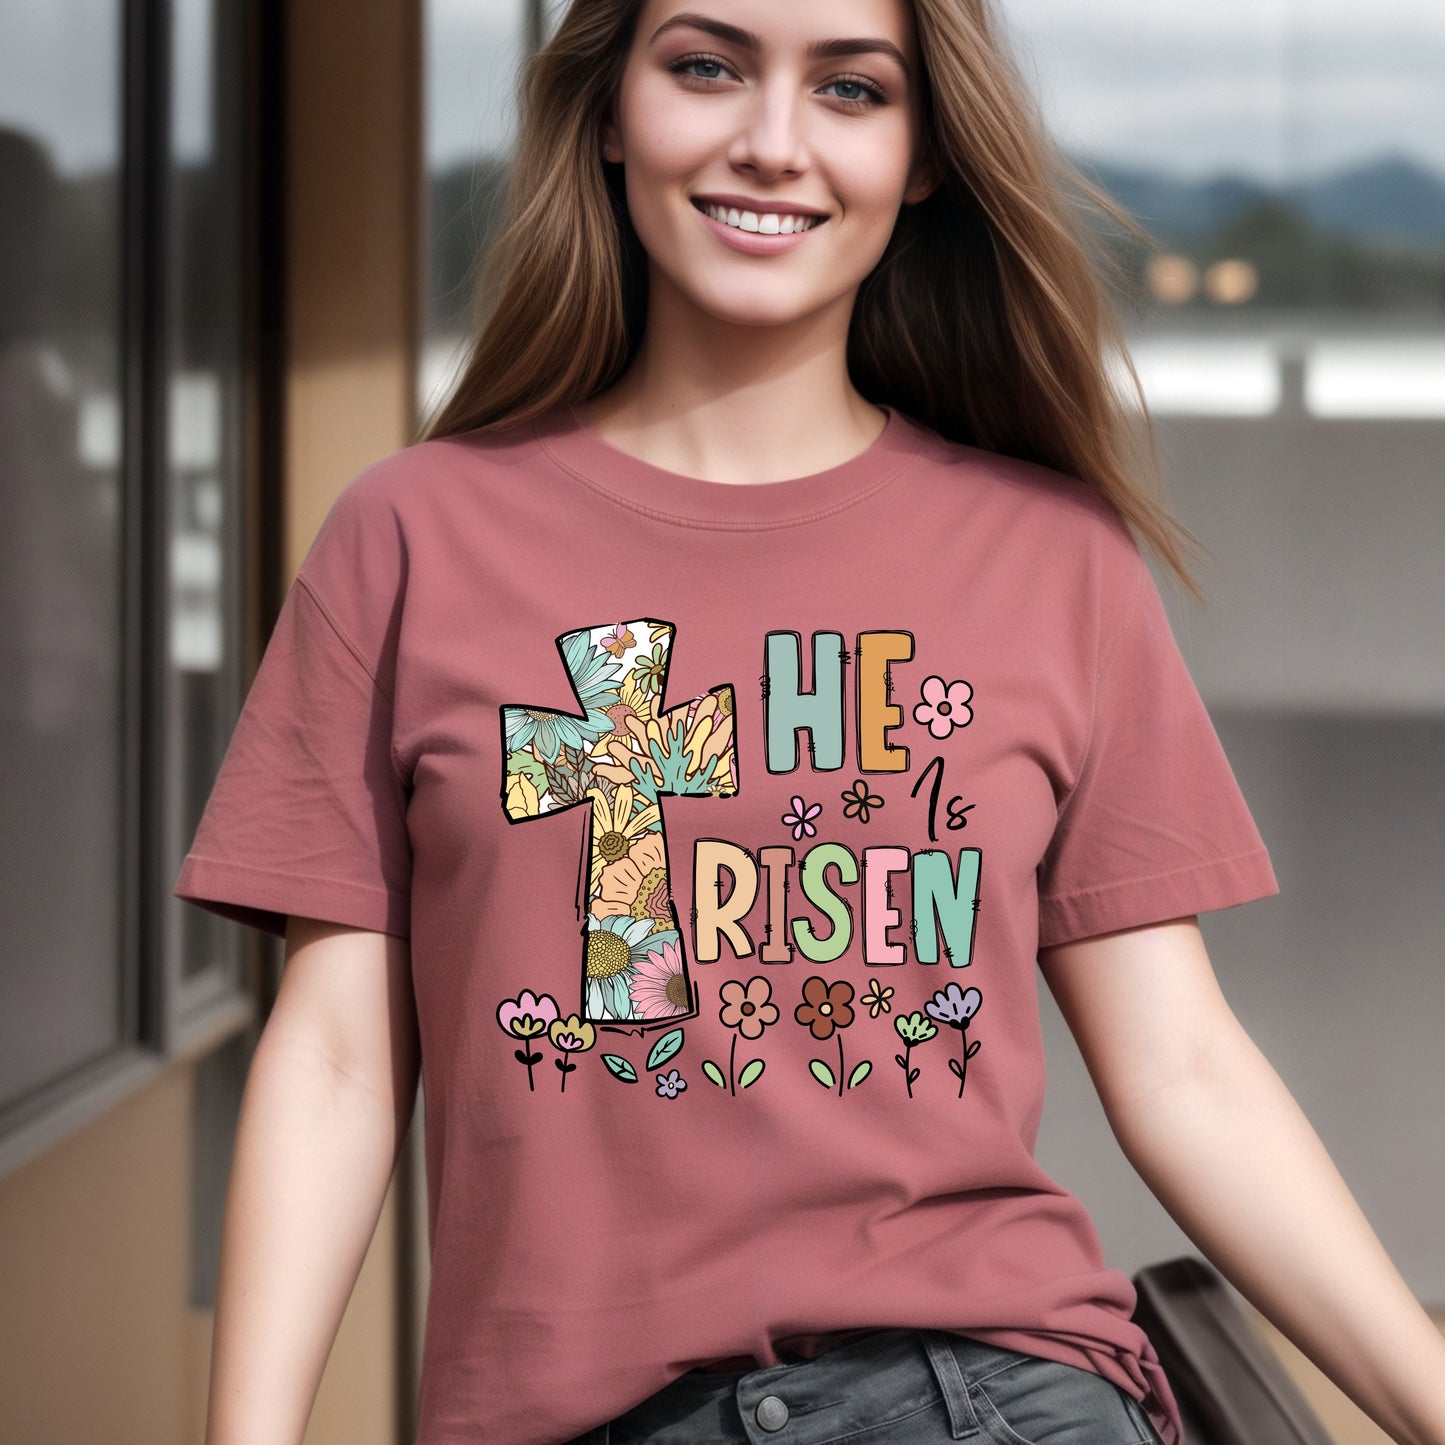 He Is Risen T-shirt, Easter T-Shirt, He Is Risen Shirt, Easter Shirt, Christian T-Shirt, Inspirational T-Shirt, Gifts For Her, Easter Cross